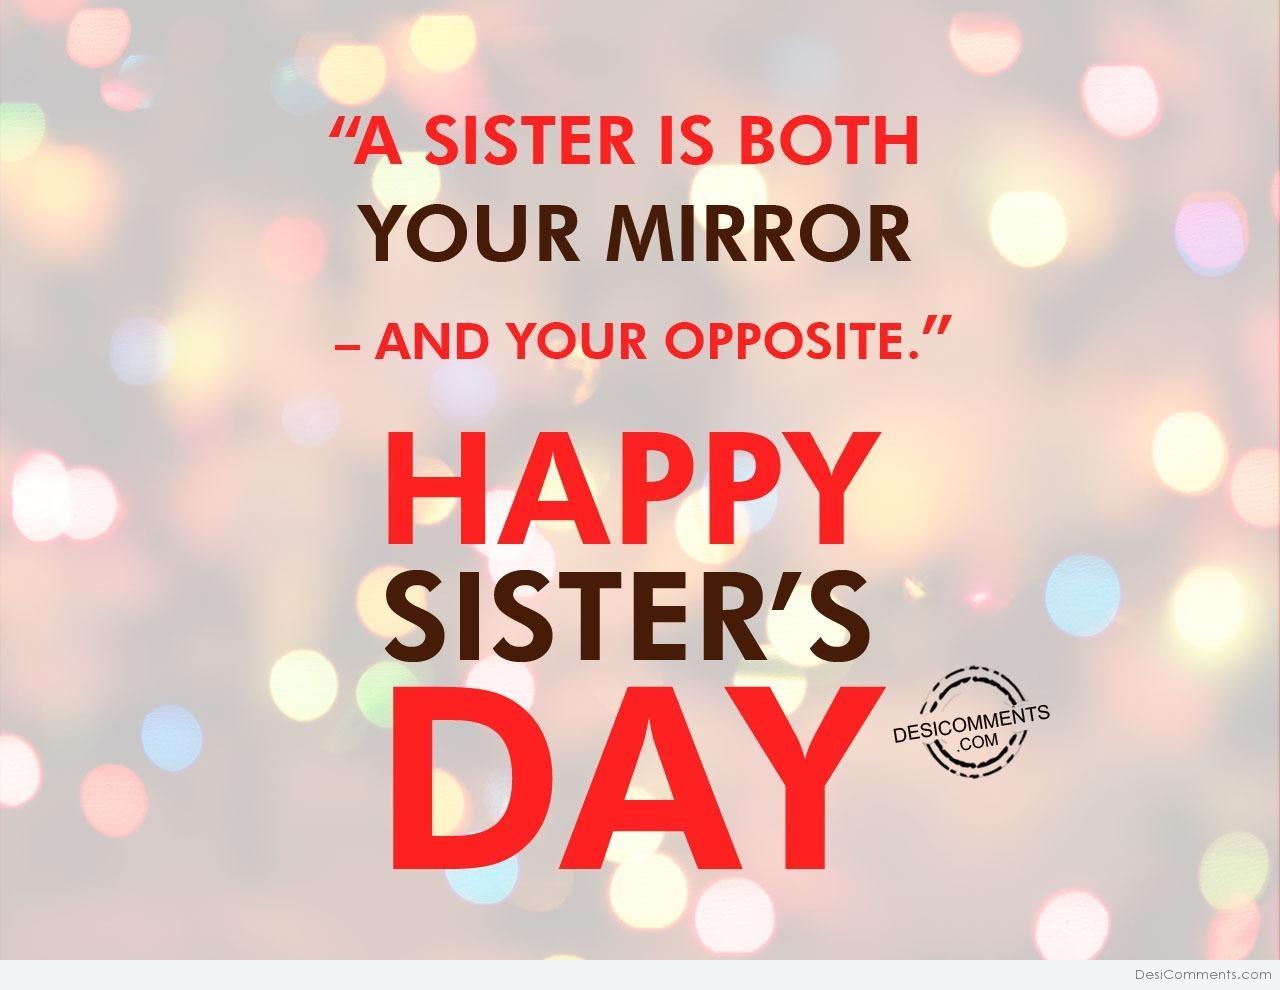 Sister's Day Picture, Image, Graphics